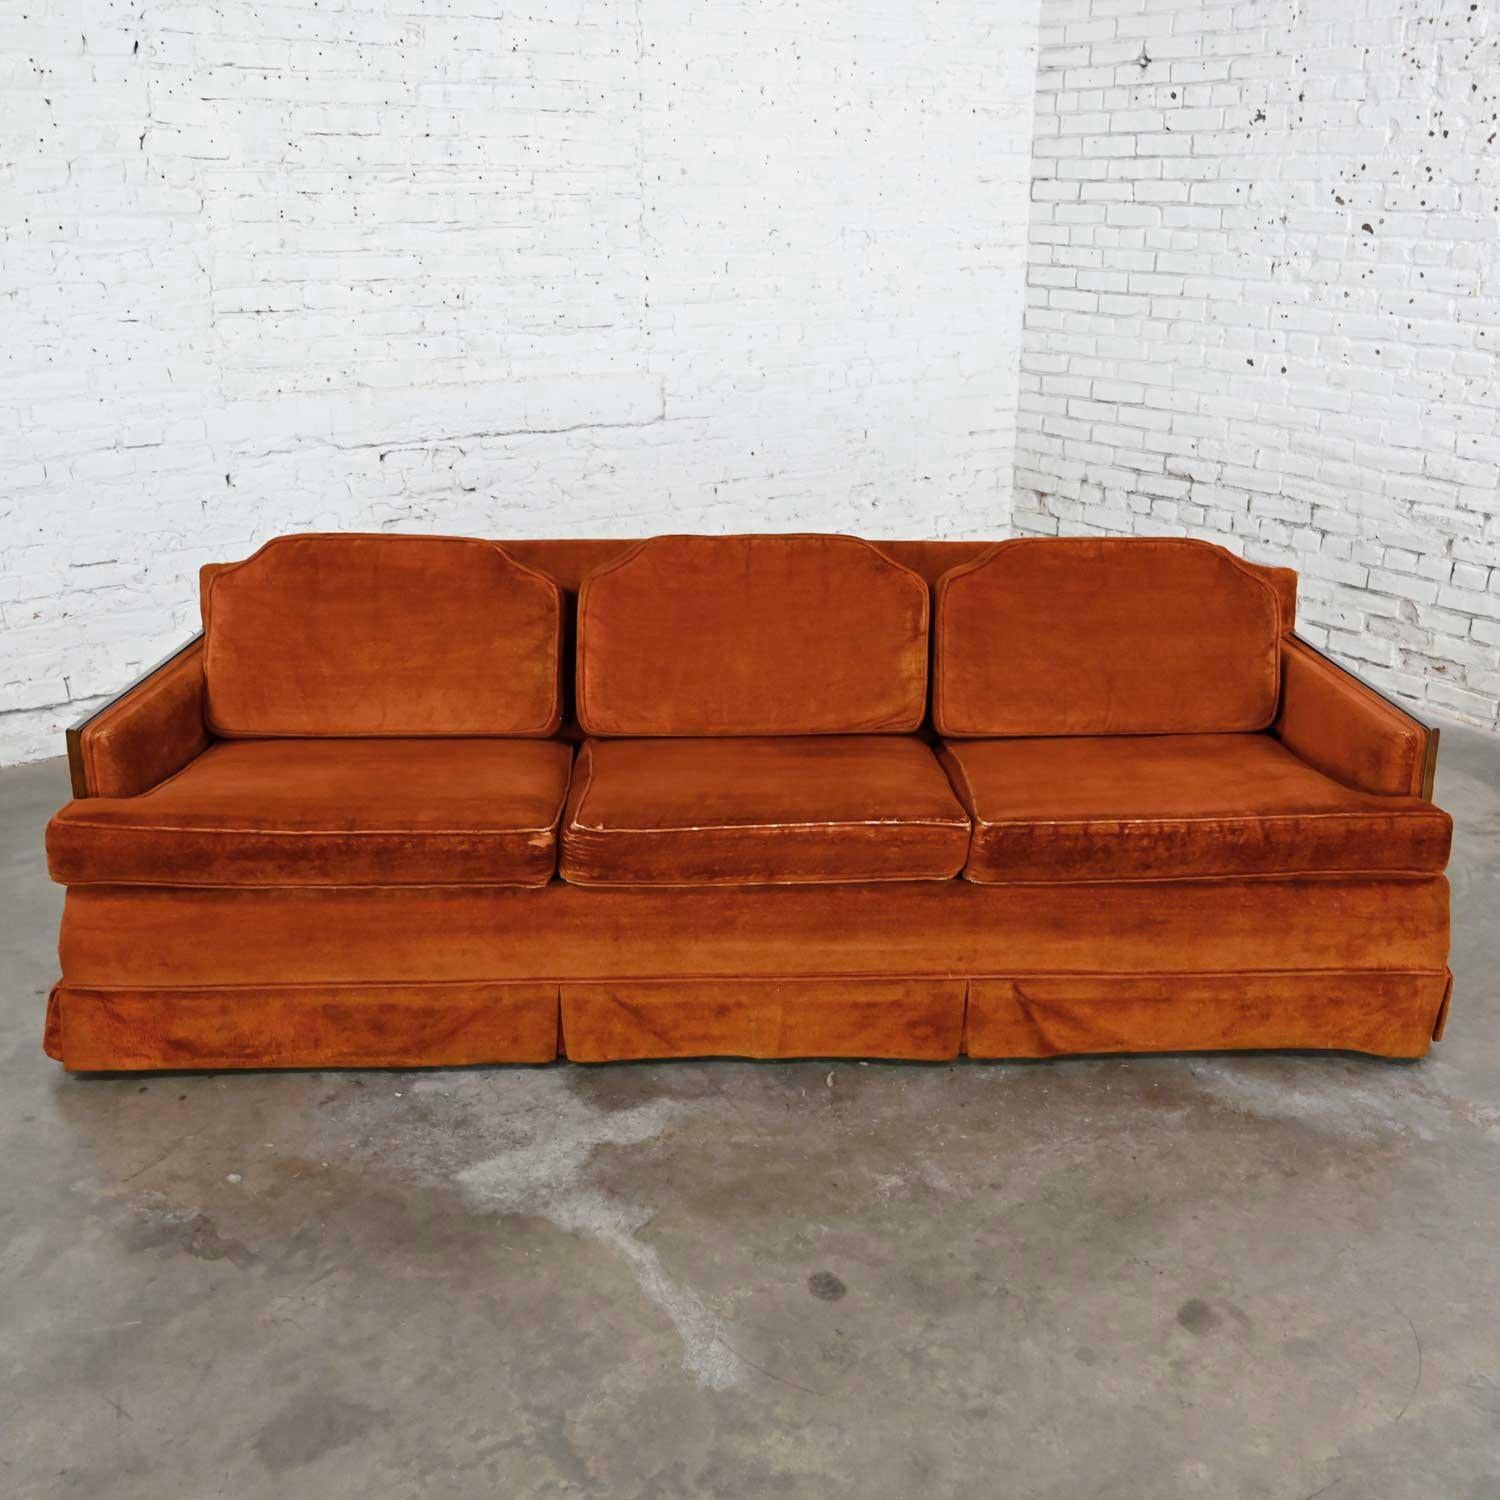 Outstanding mid-century Hollywood Regency rust colored brushed chenille Lawson style sofa with walnut trim and tapered square legs. Beautiful condition, keeping in mind that this is vintage and not new so will have signs of use and wear. The wood